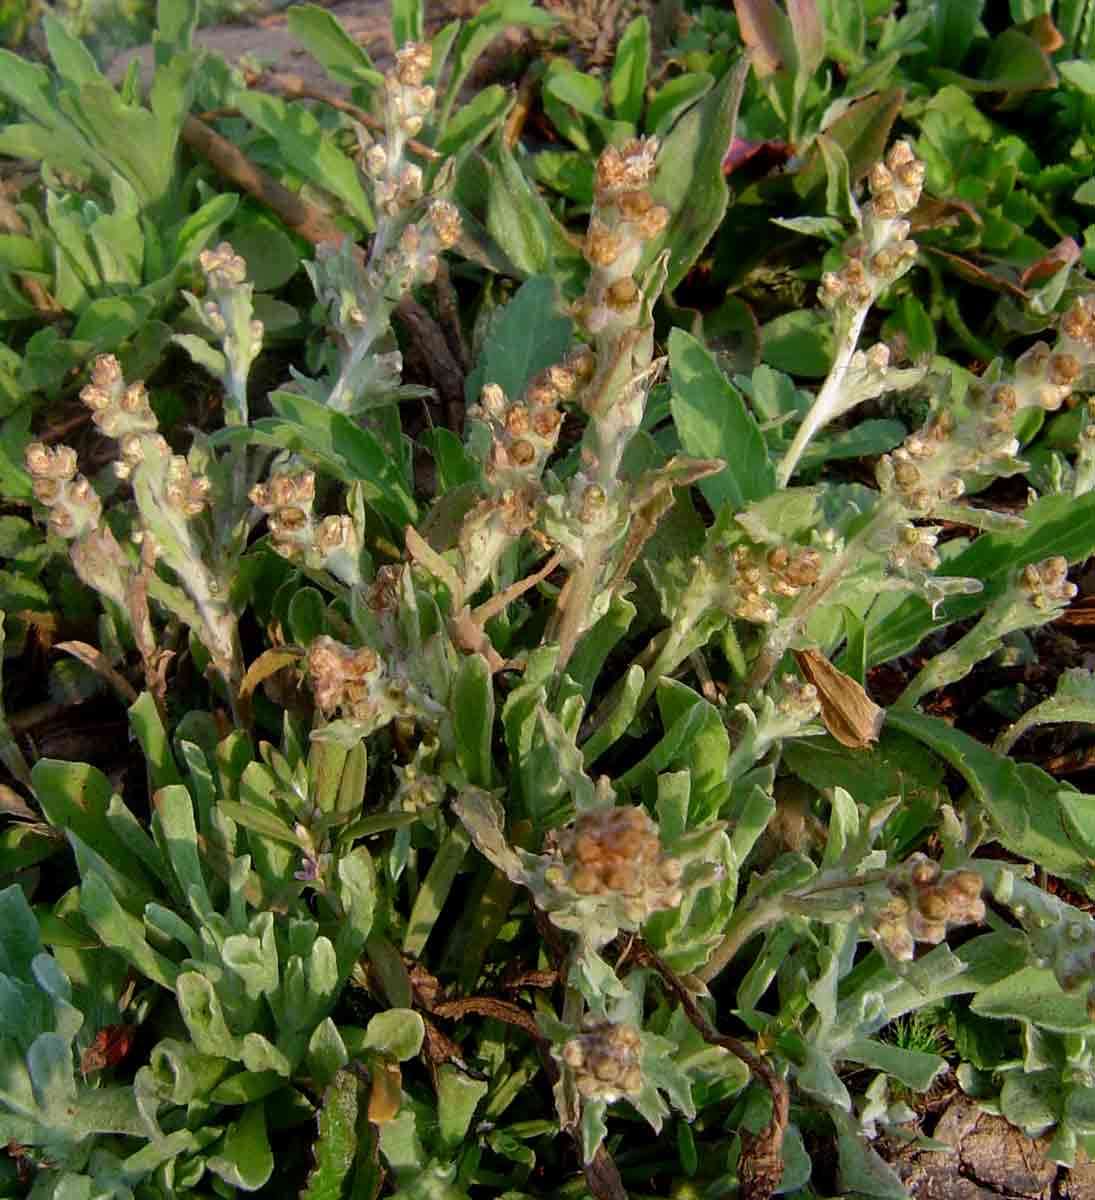 Image of cudweed